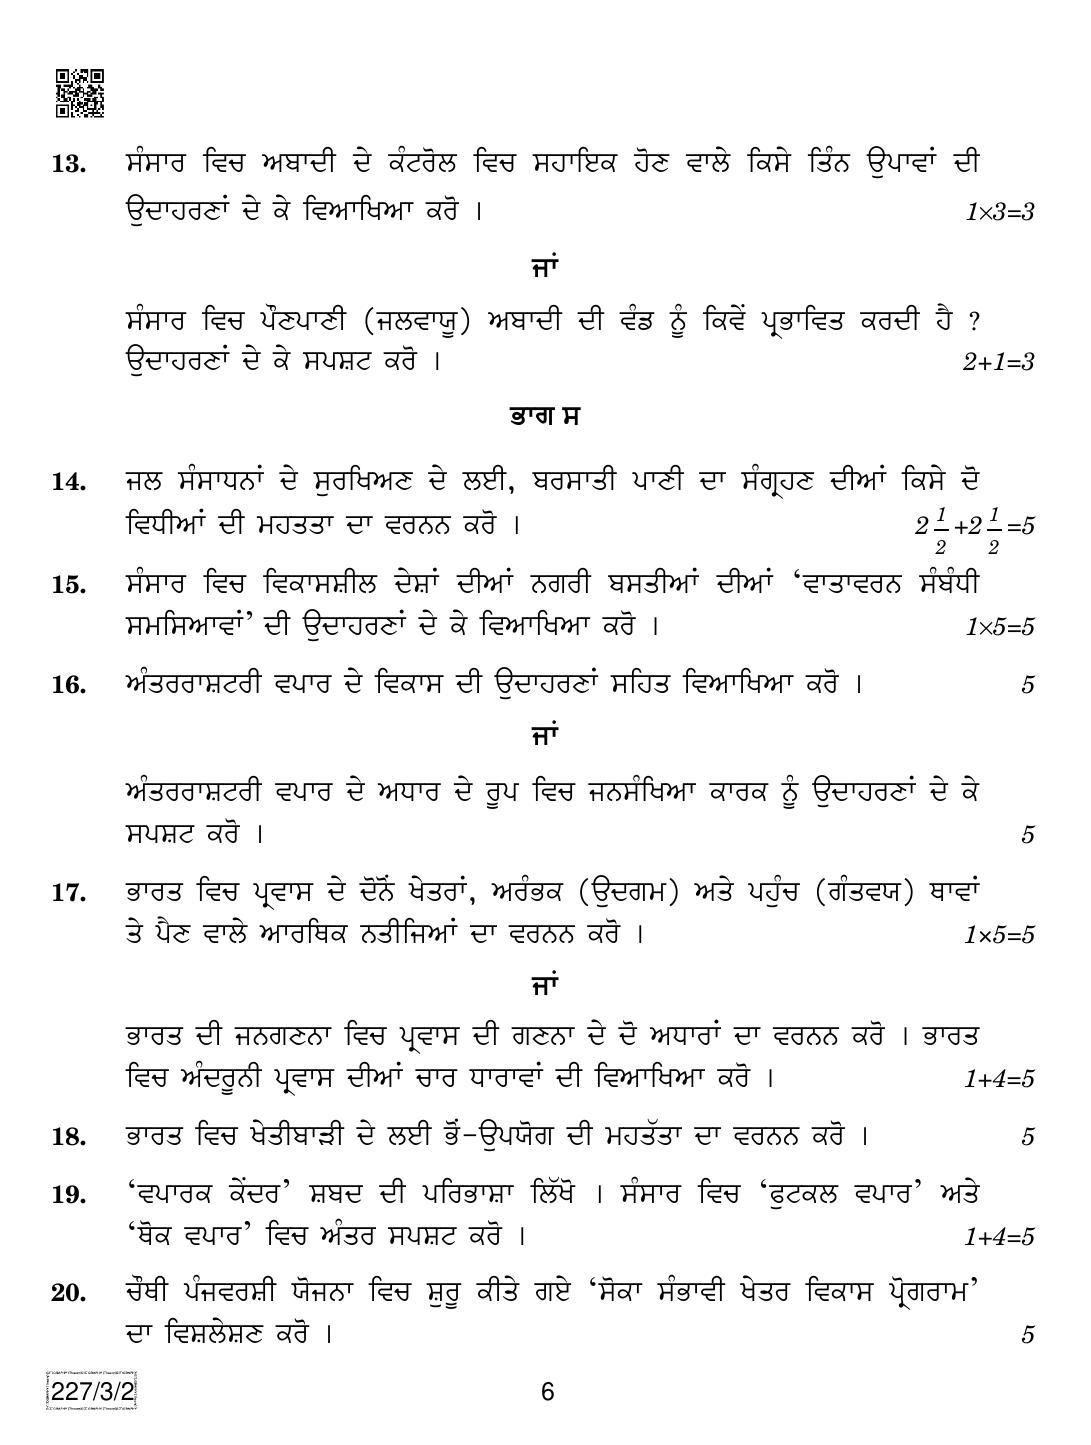 CBSE Class 12 227-3-2 Geography (Punjabi) 2019 Question Paper - Page 6